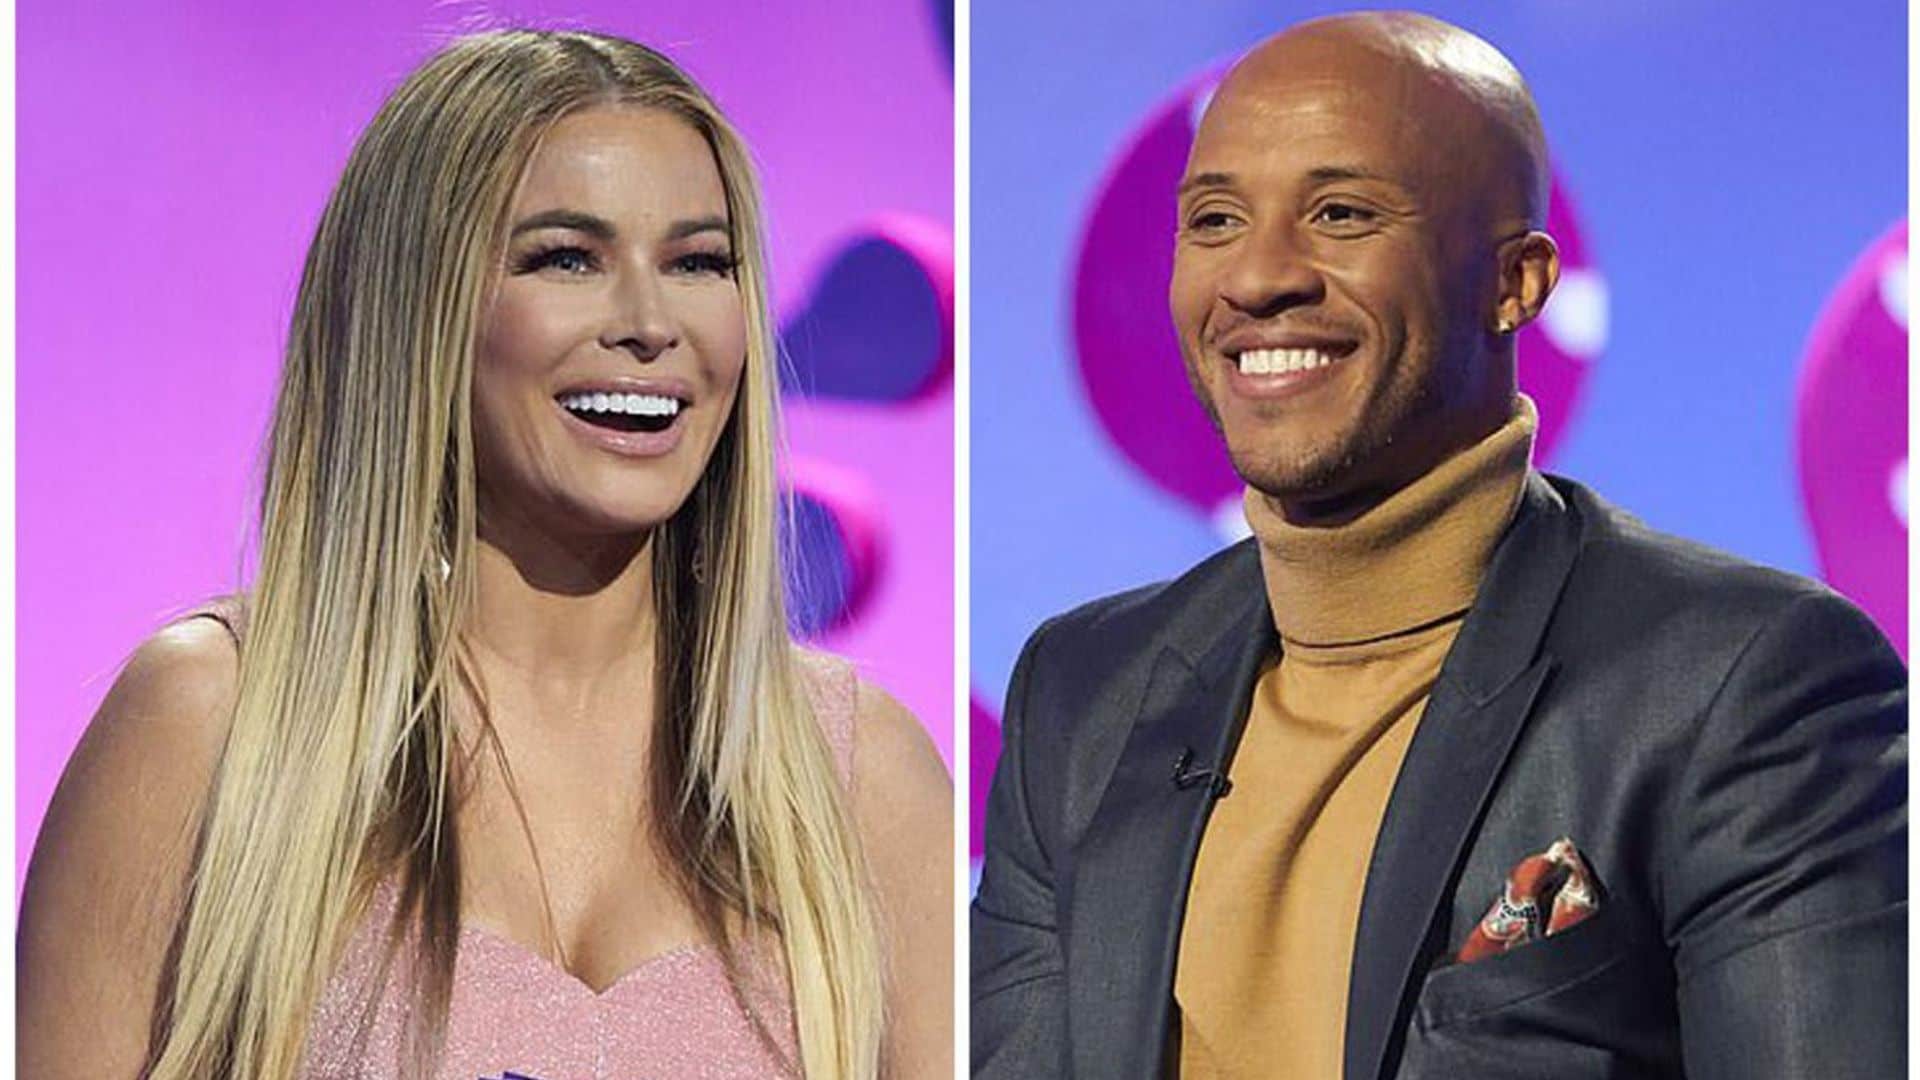 Carmen Electra chooses to go out with a real estate agent during 'The Celebrity Dating Game'